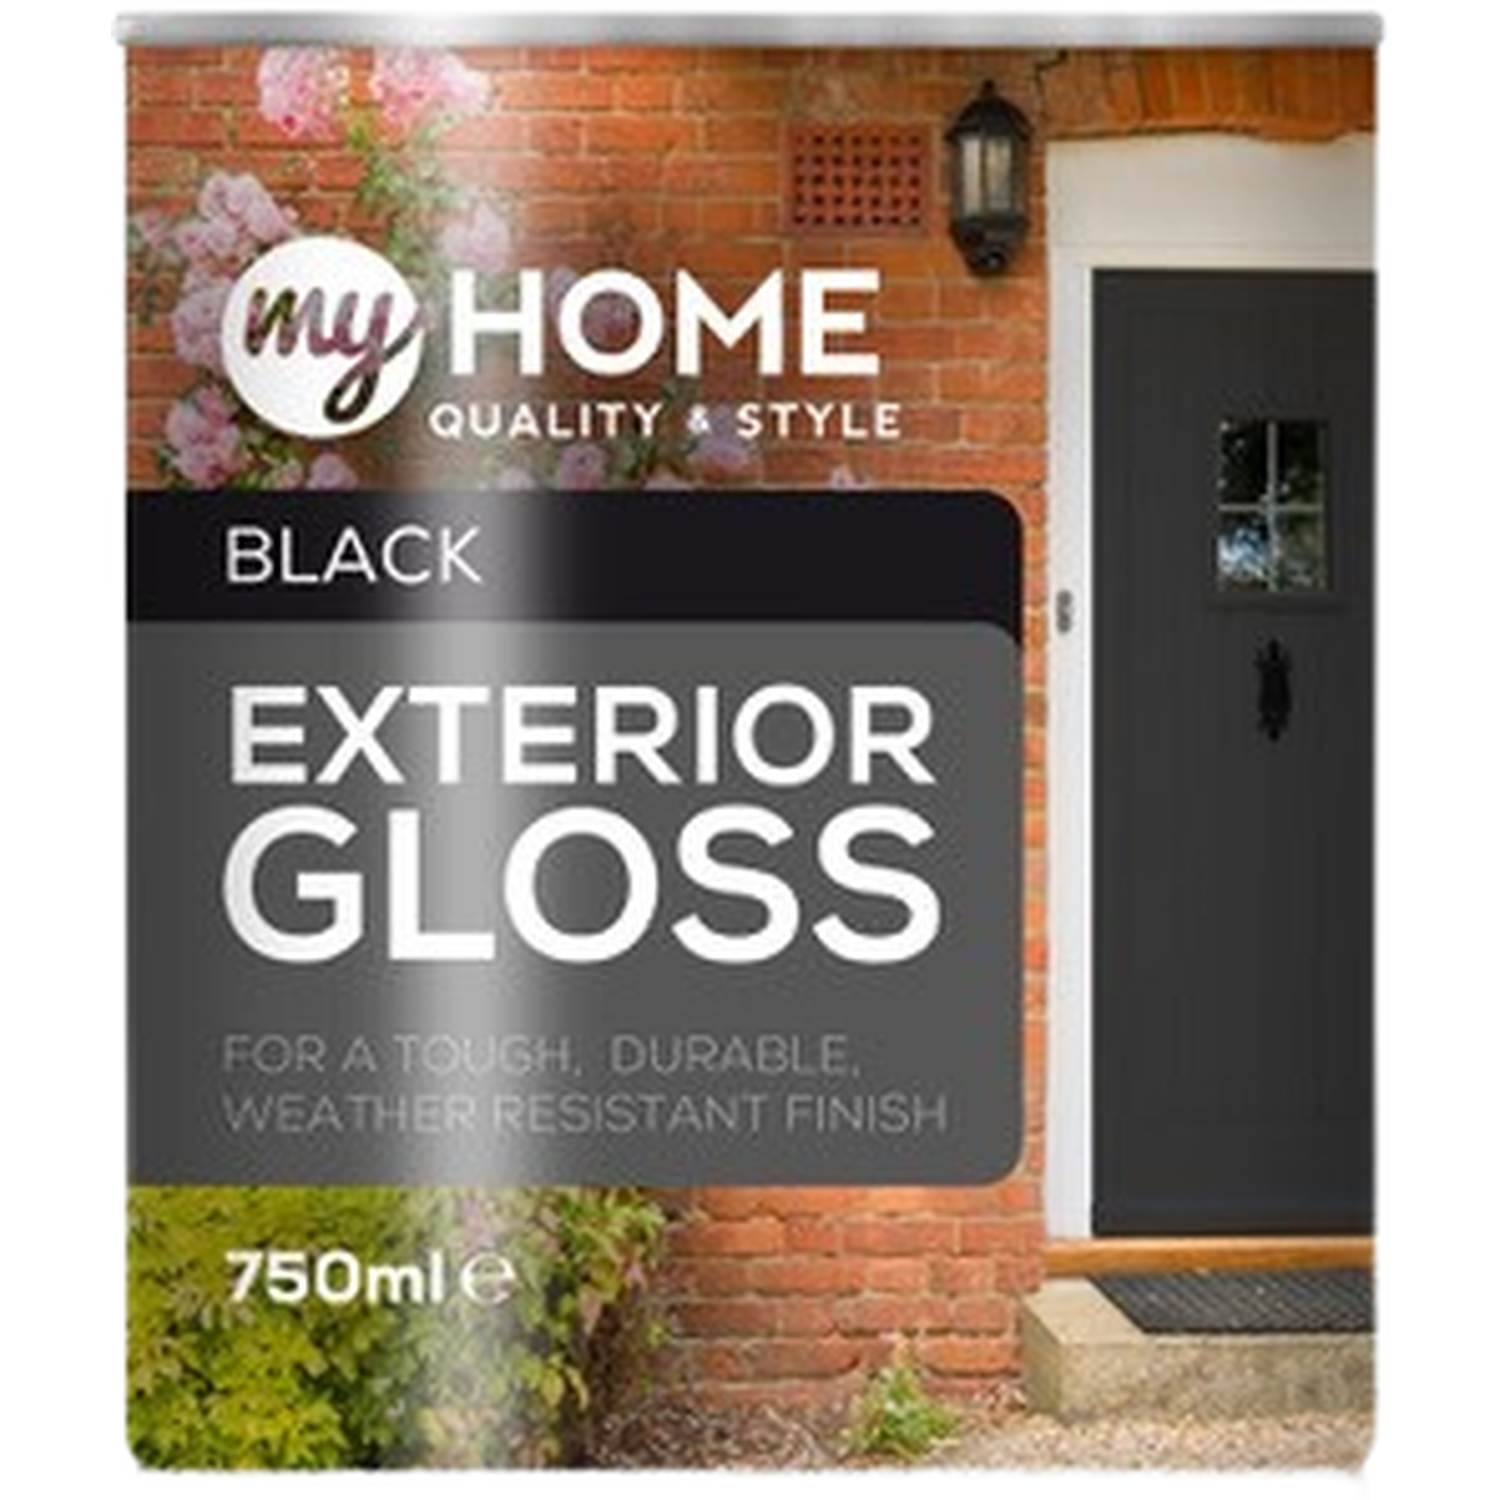 My Home Multi Surface Black Gloss Paint 750ml Image